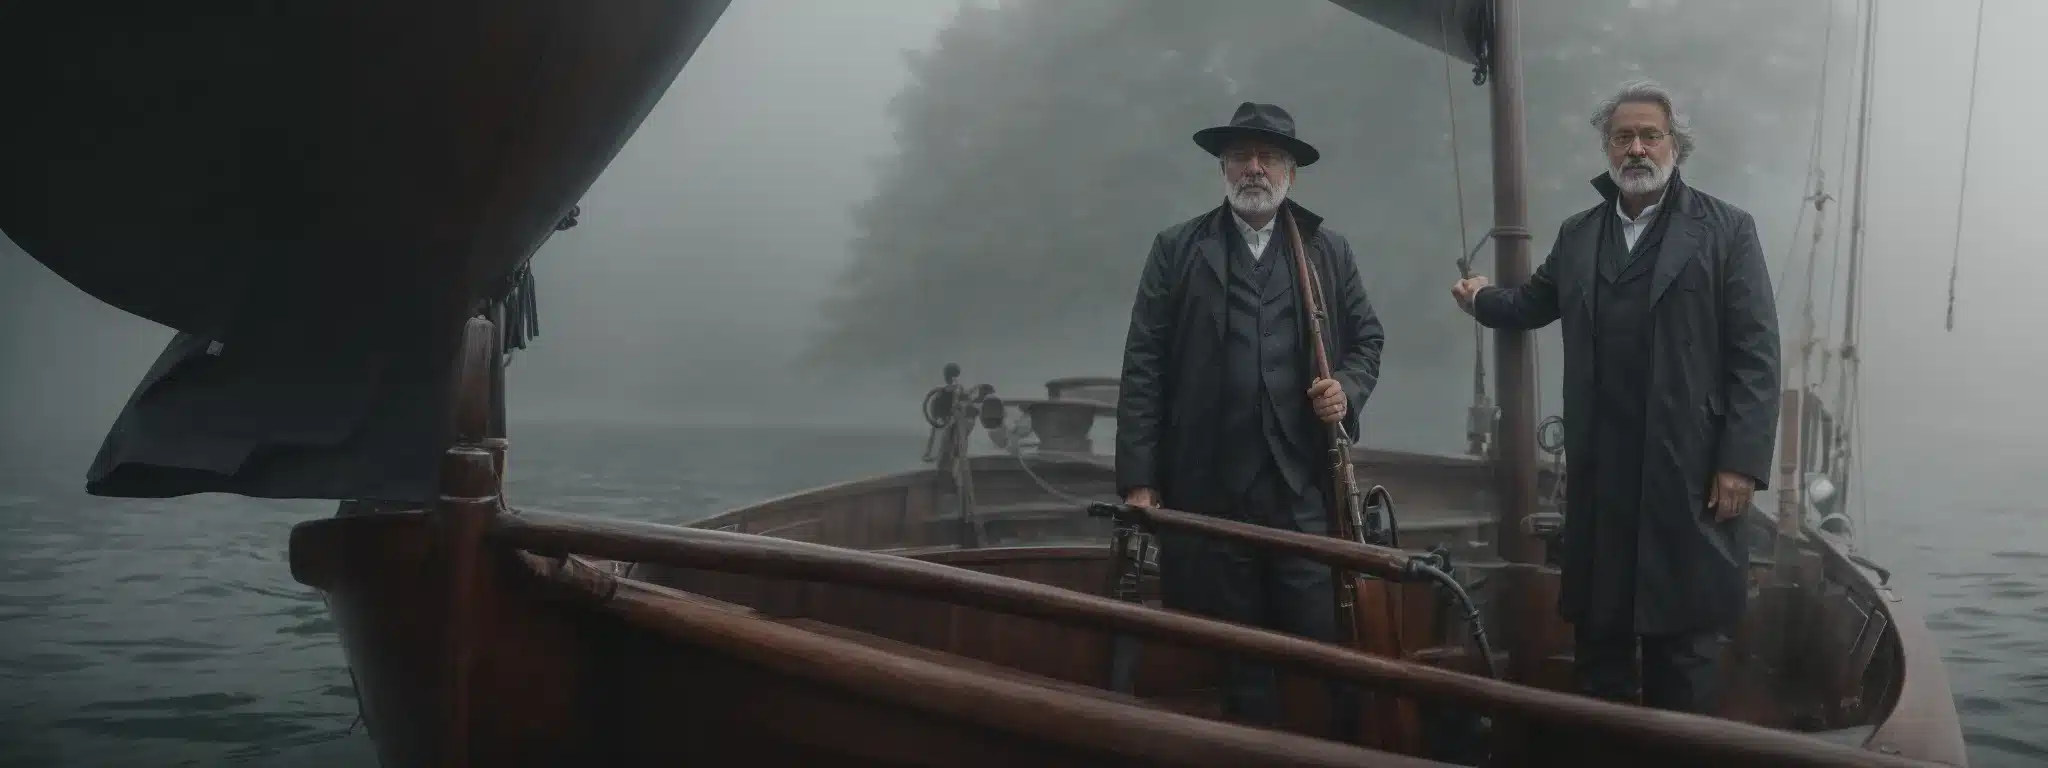 A Visionary Entrepreneur Stands At The Helm Of A Wooden Ship, Navigating Through Mist-Shrouded Waters With A Determined Gaze Towards An Unseen Horizon.